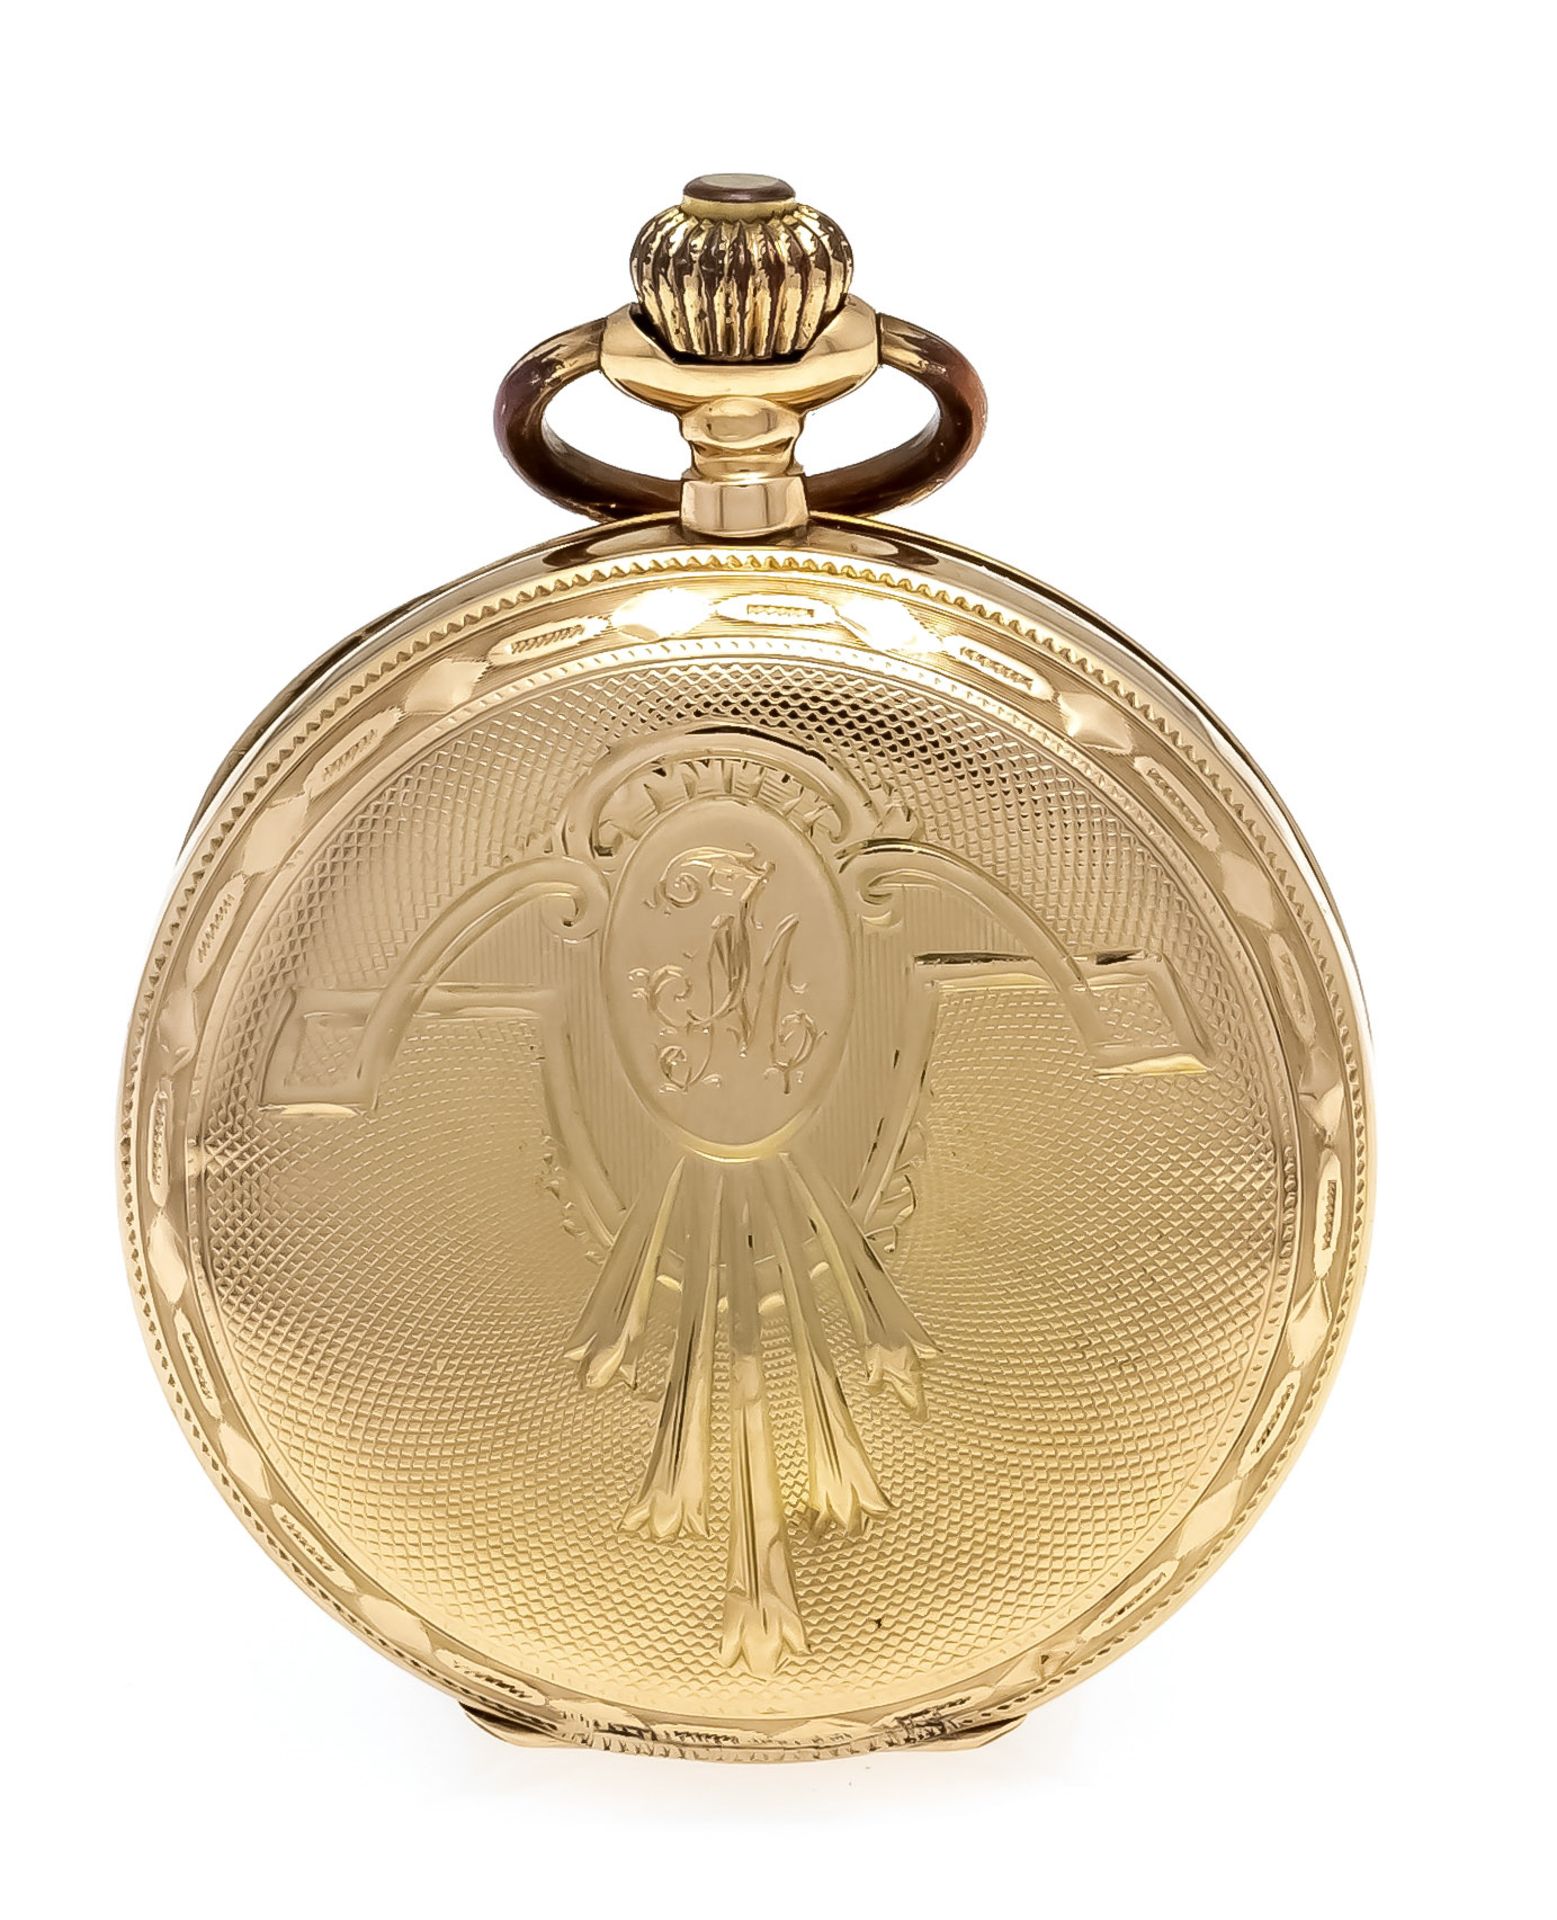 Ladies jump cover pocket watch 585/000 GG, both covers guilloché and with art nouveau ornaments, - Image 2 of 4